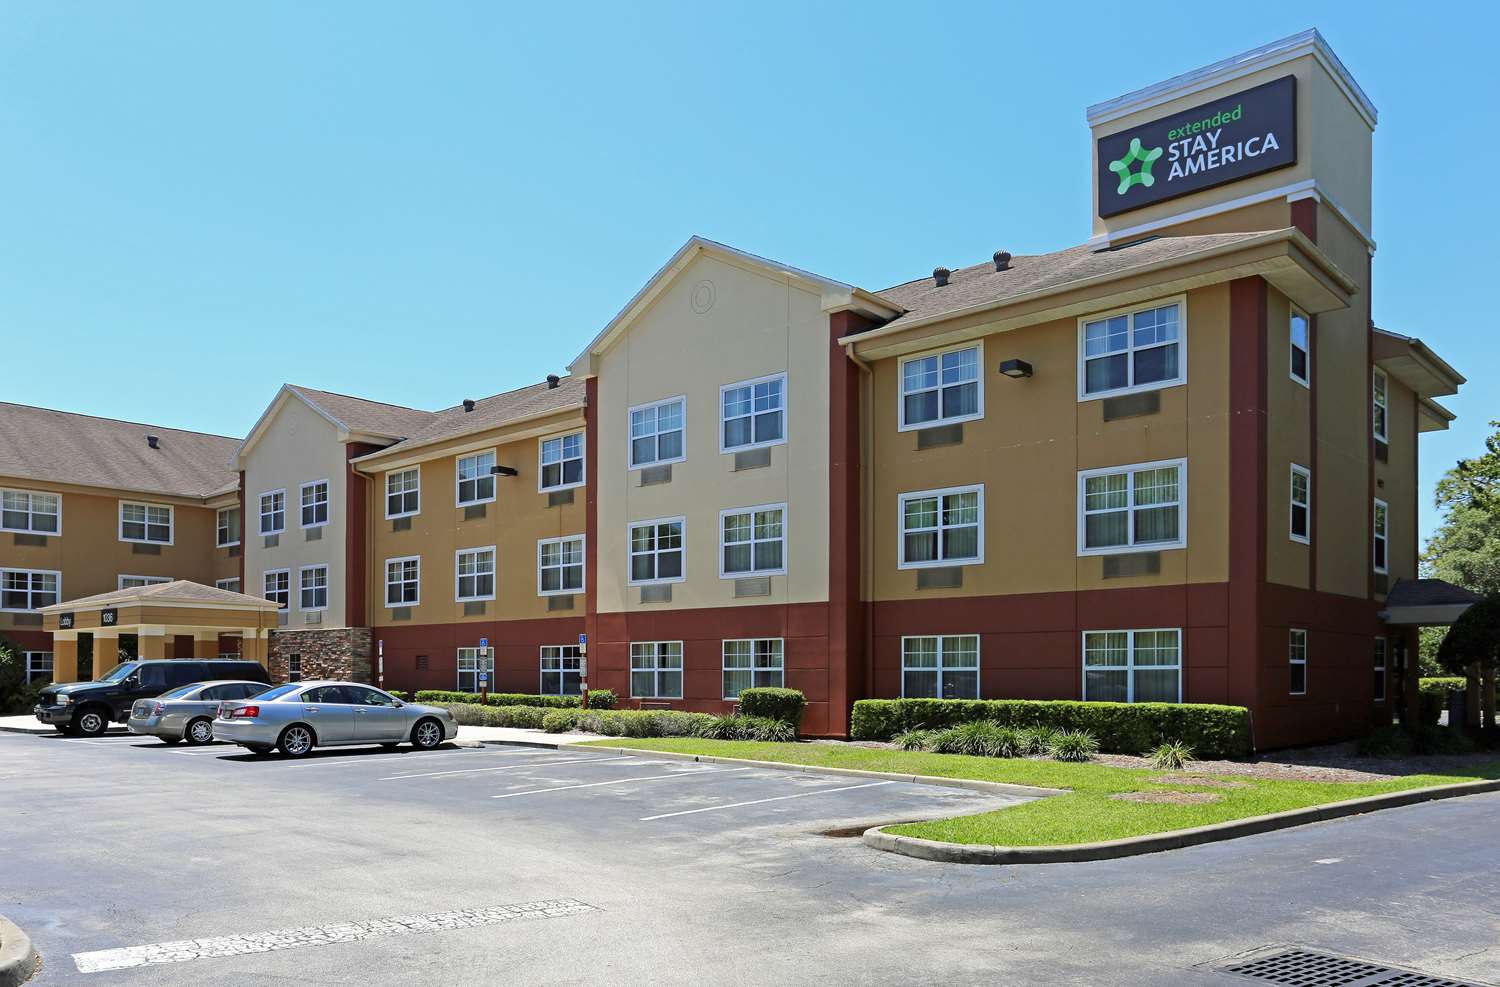 Pet Friendly Extended Stay America - Orlando - Lake Mary -1036 Greenwood Blvd in Lake Mary, Florida